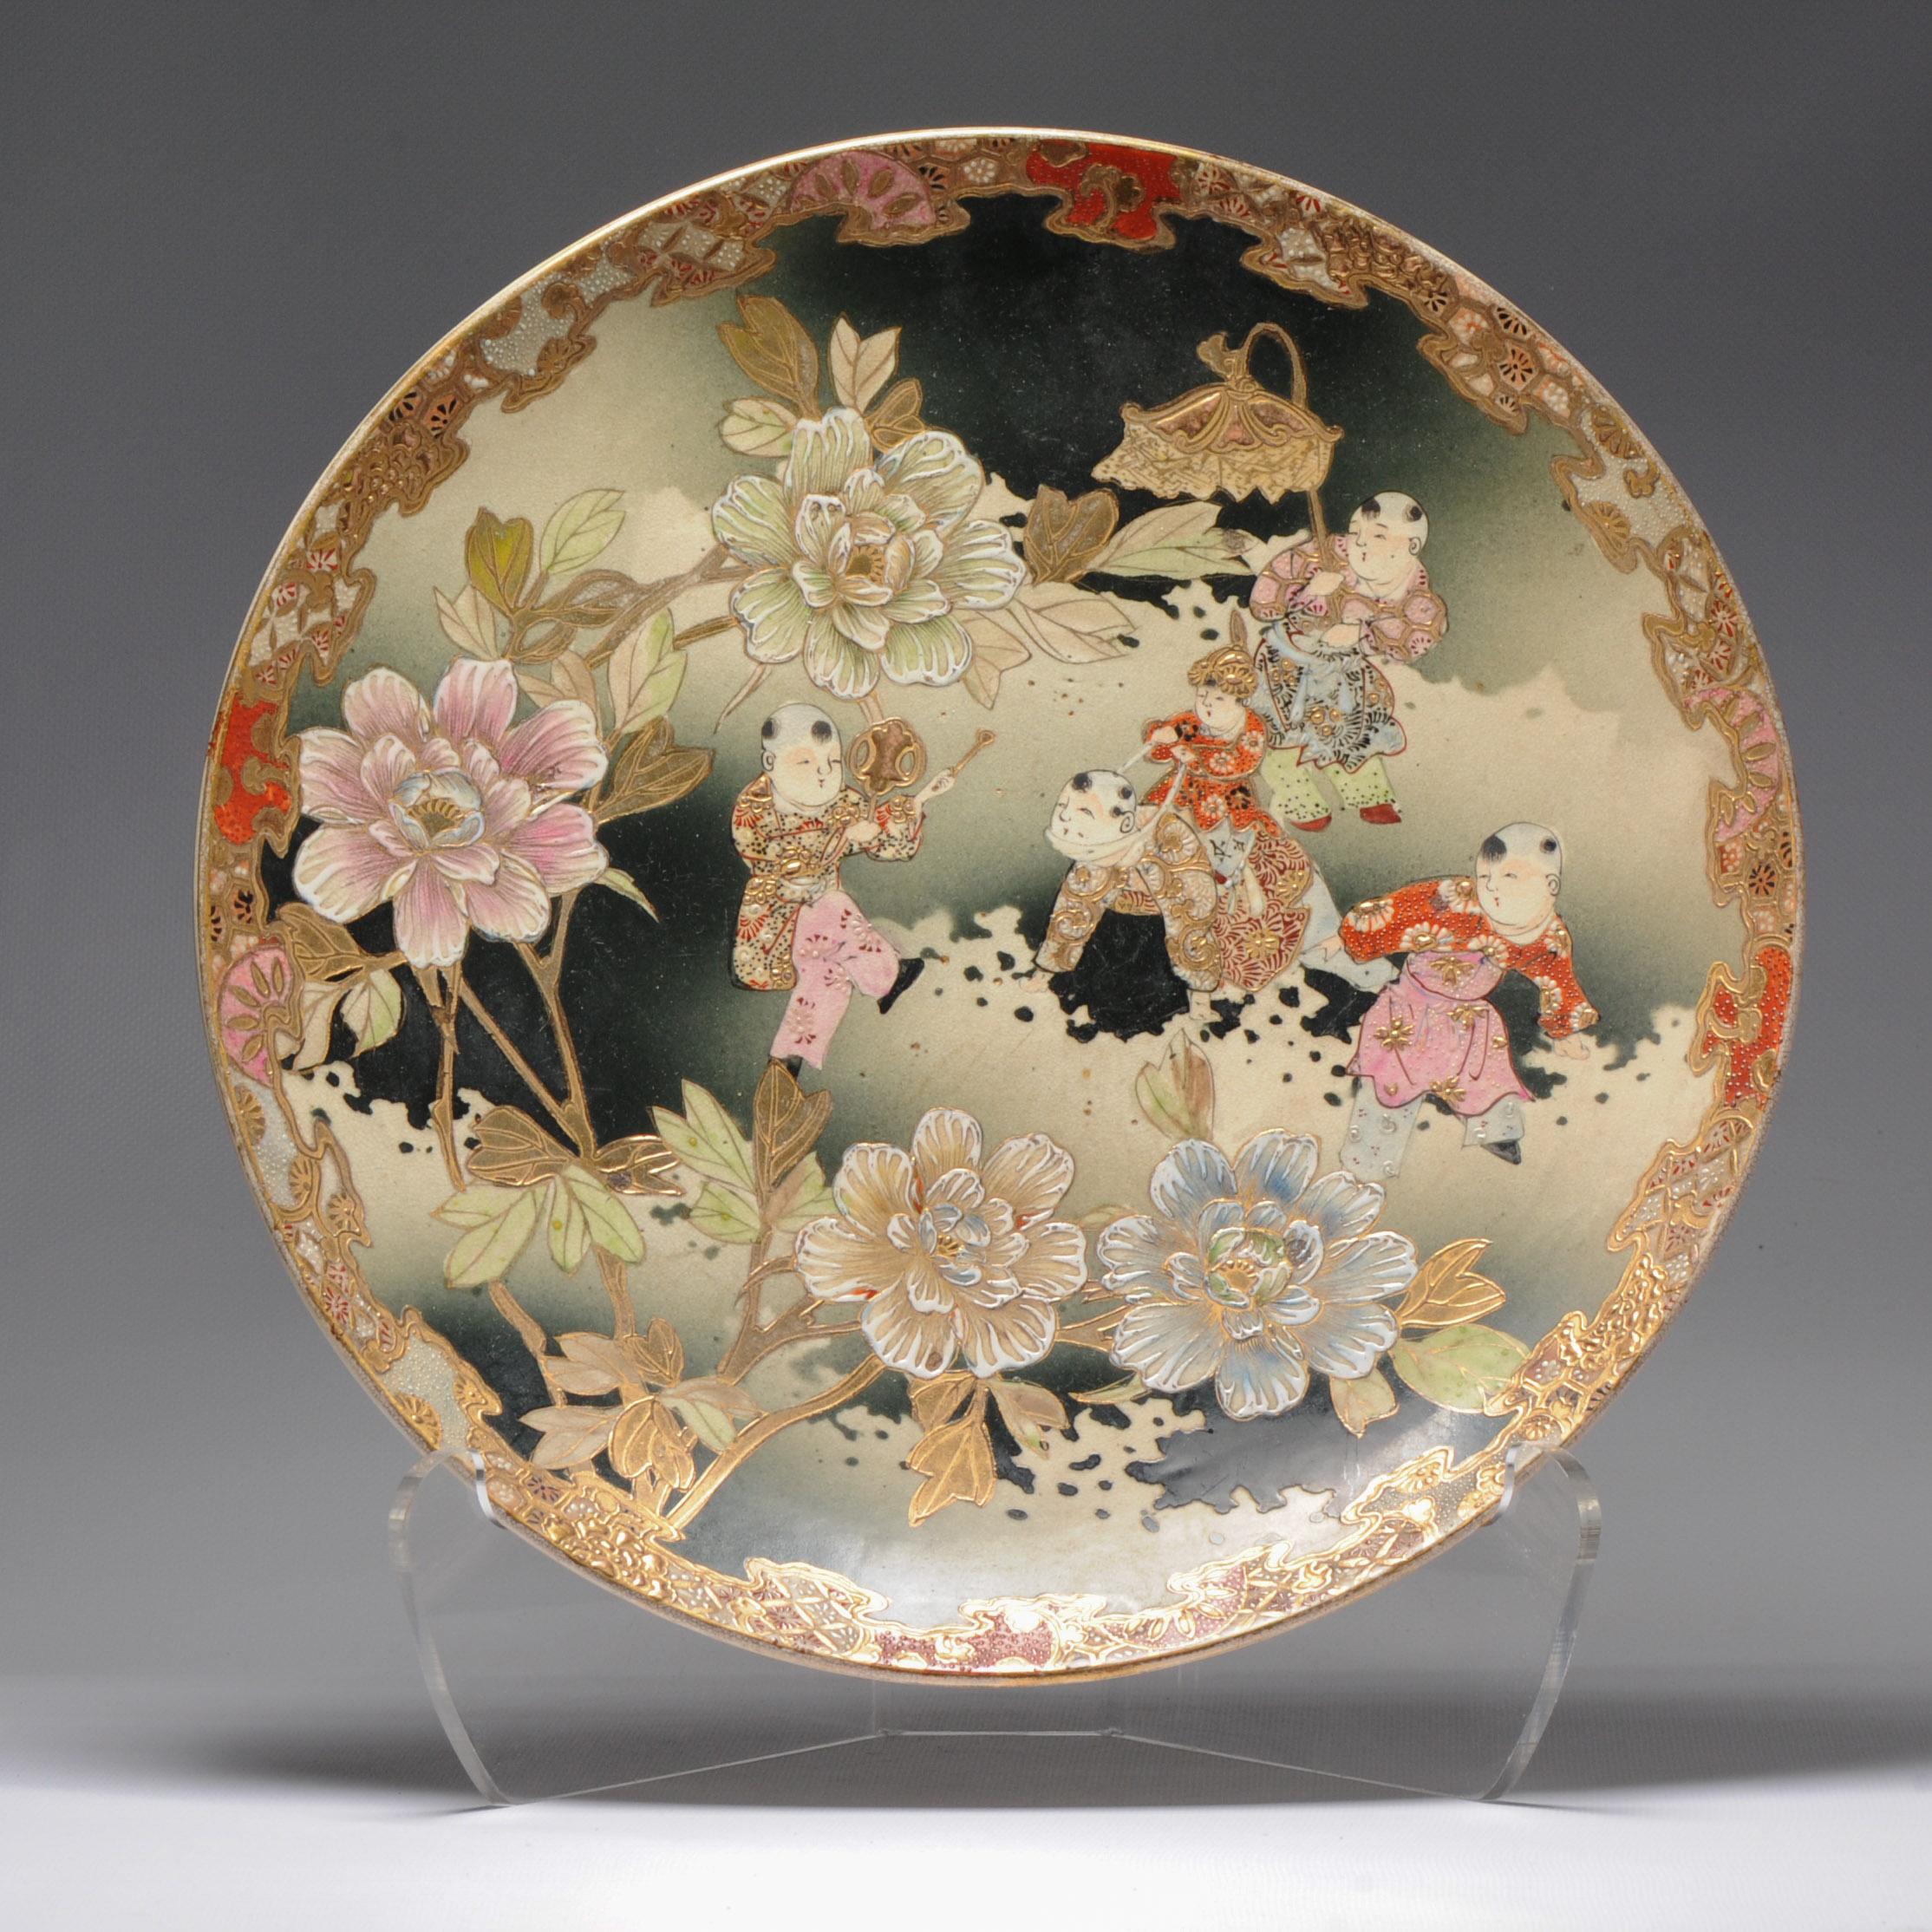 Porcelain Antique 19th C Meiji Japanese Satsuma Plate, Charger Very Large Unmarked For Sale